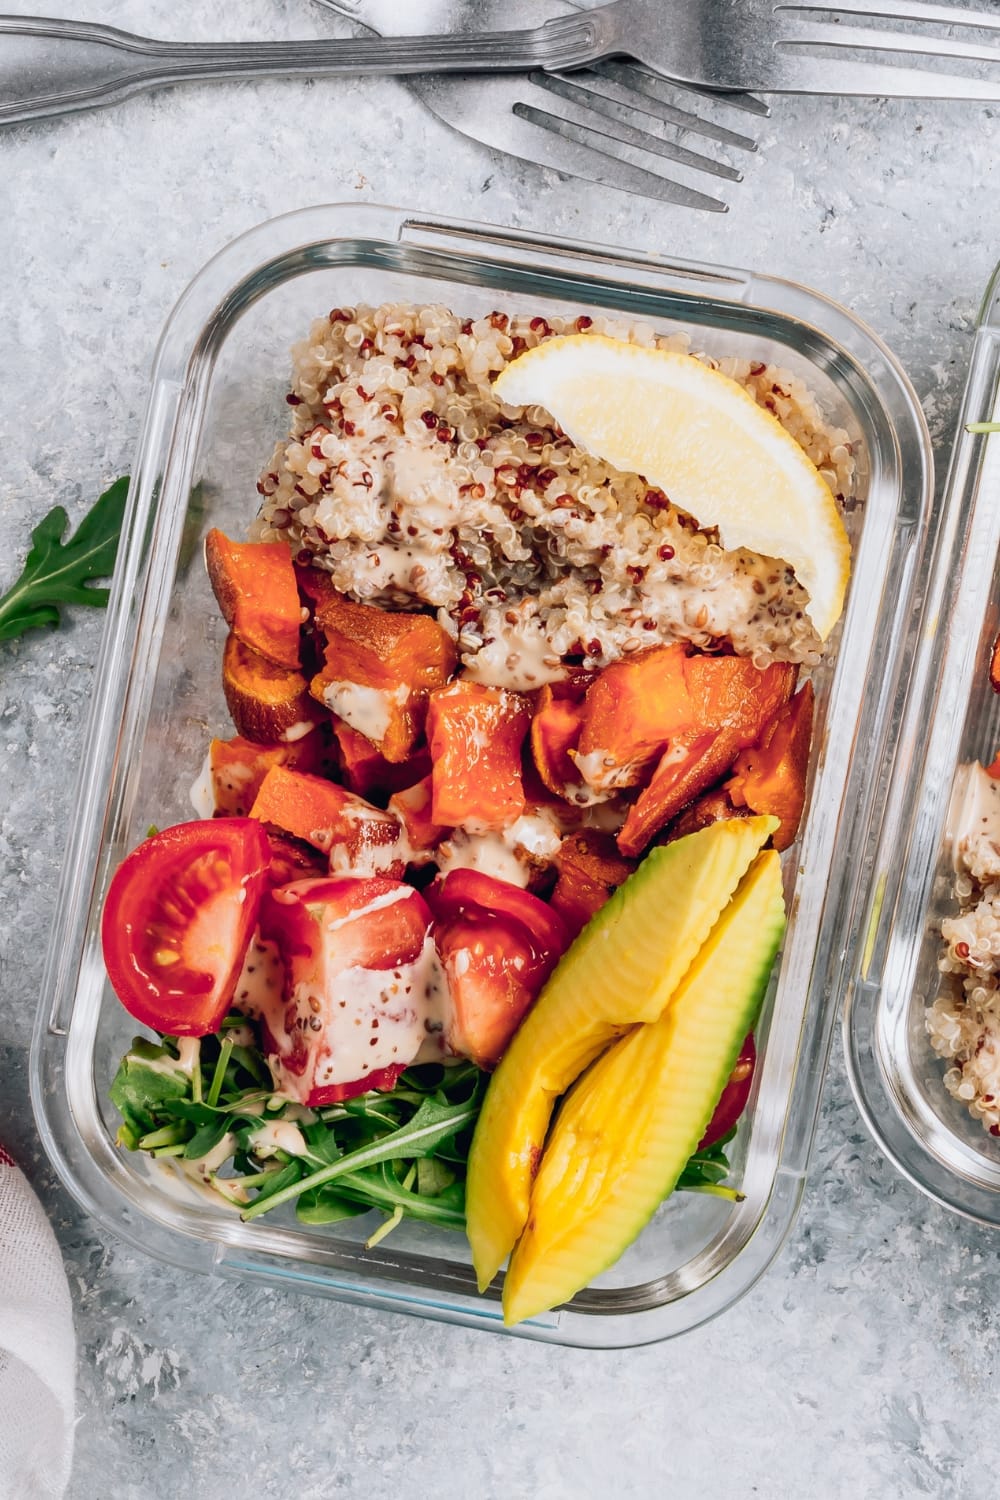 Healthy Meal Prep Quinoa Salad with Avocados, Tomatoes and Sweet Potatoes
